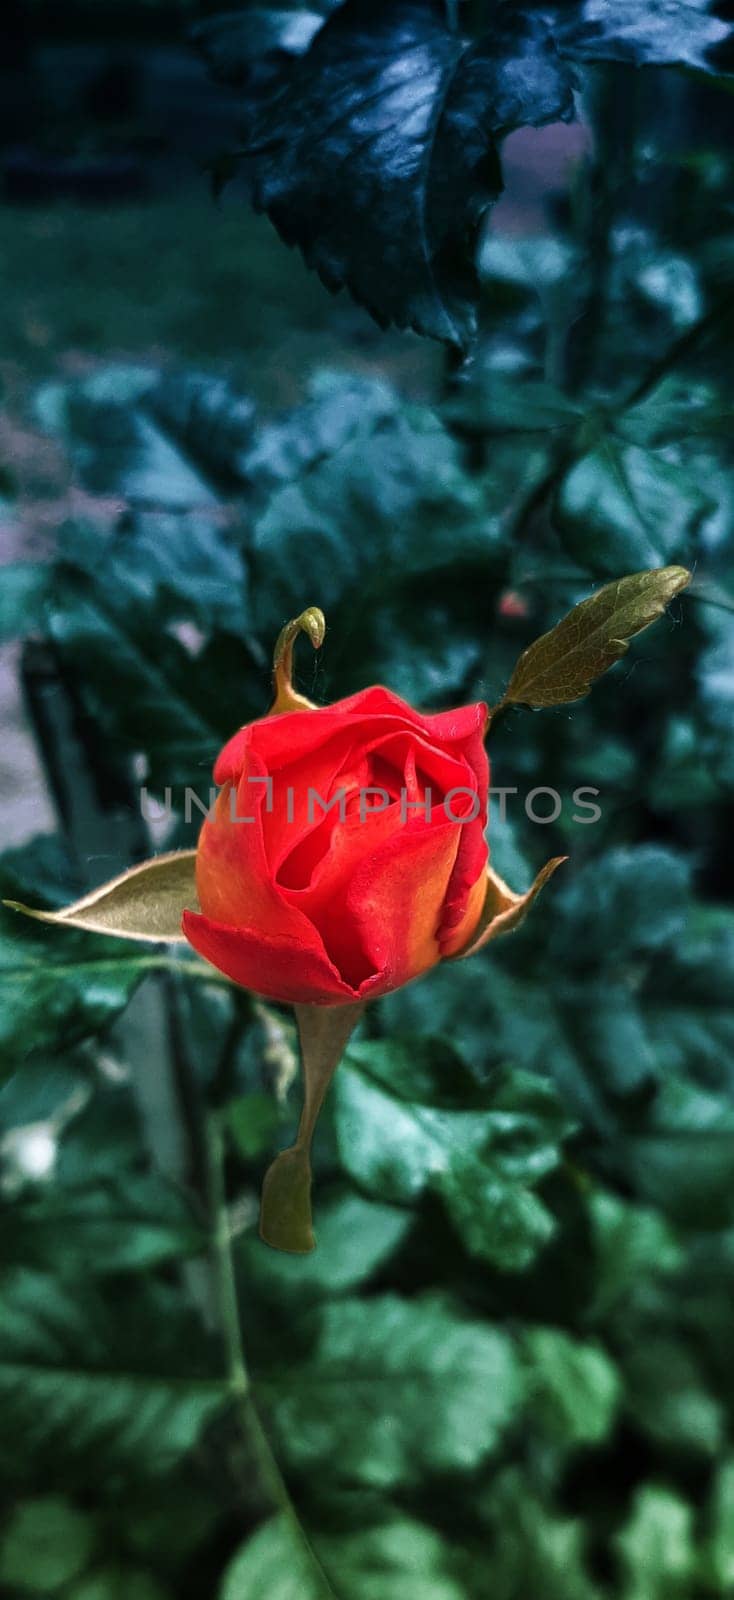 Red rose bud and gradient bokeh effect. by Inoxodec